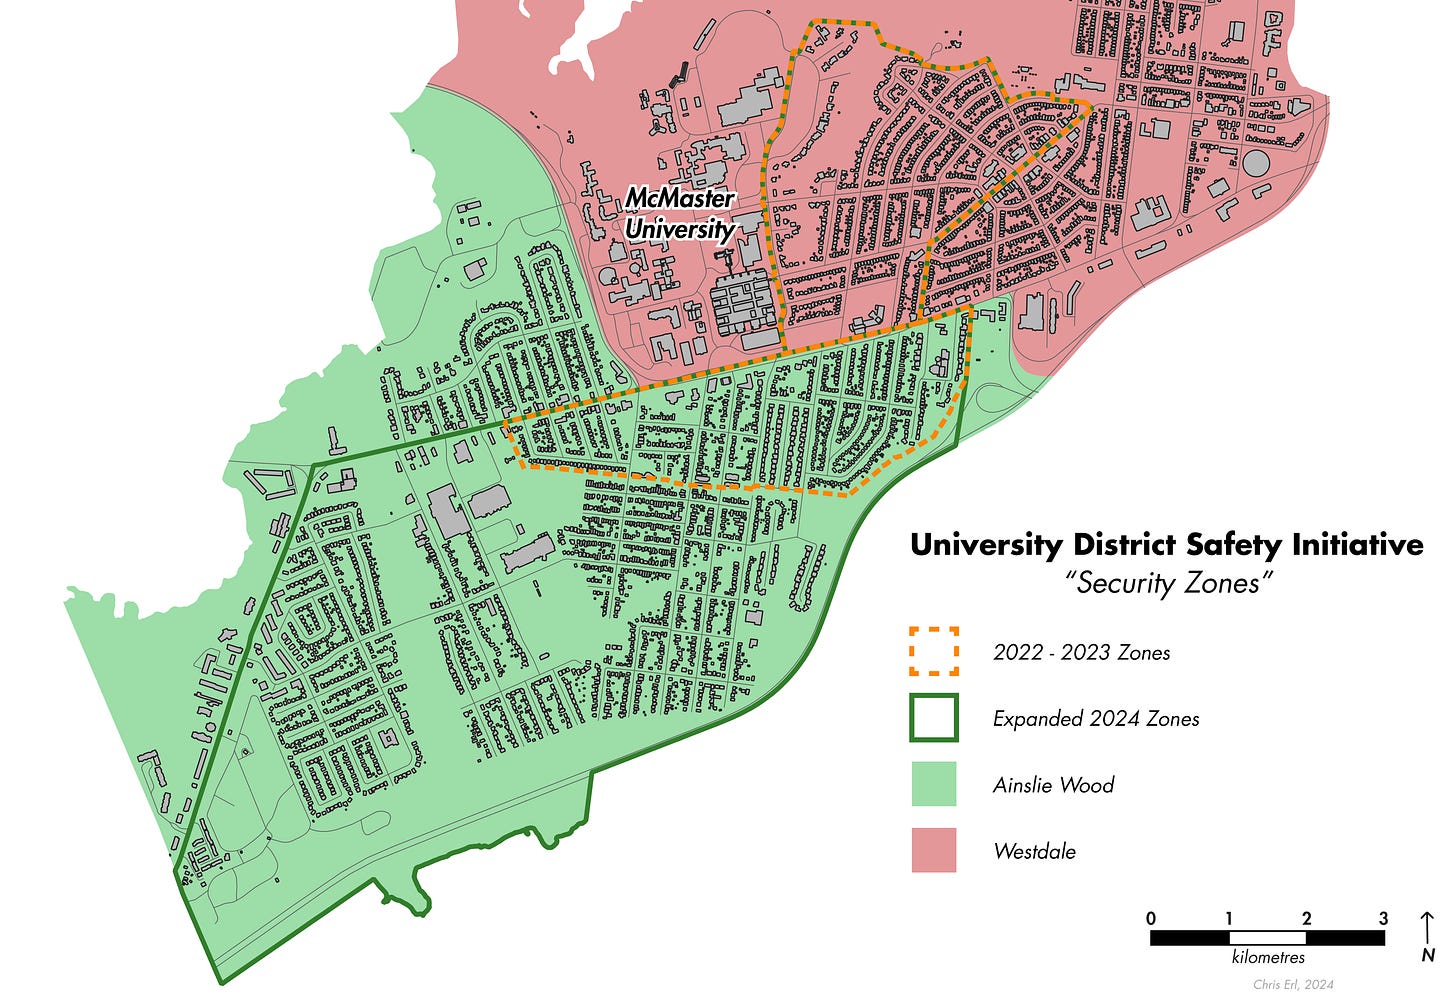 Map of the west Hamilton University District Safety Initiative security zones covering Ainslie Wood and Westdale.